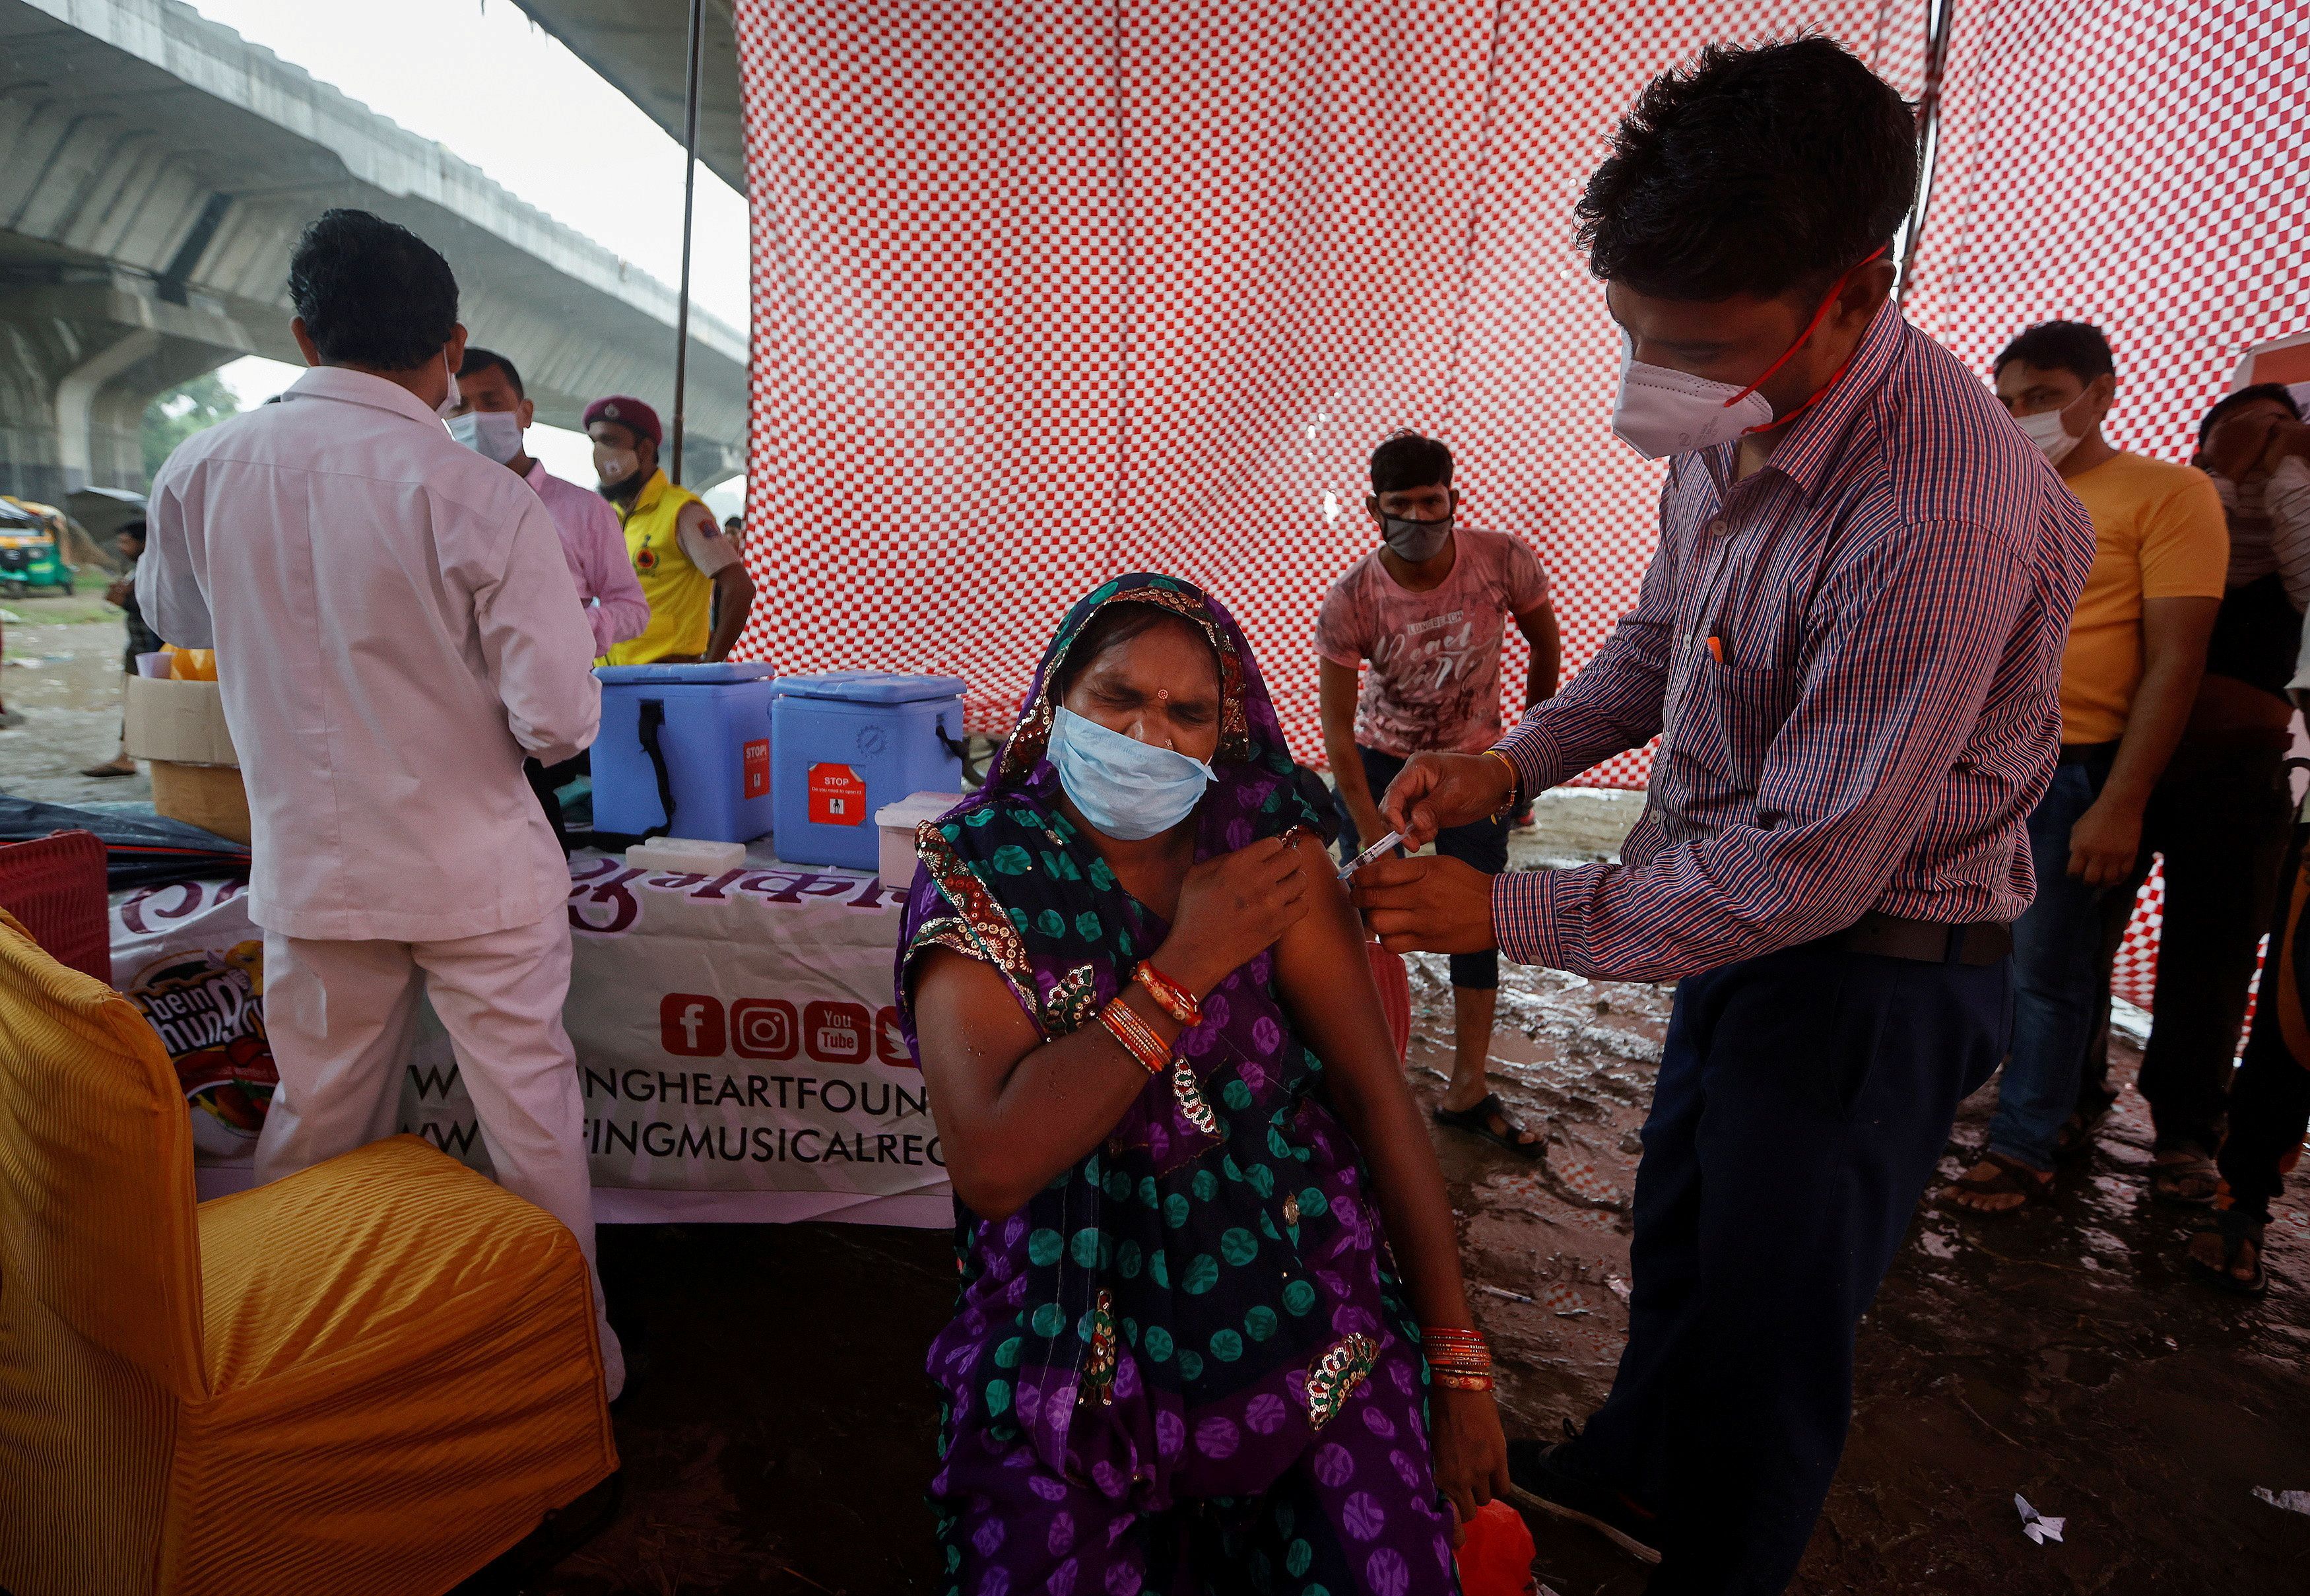 A woman receives a dose of COVAXIN coronavirus disease (COVID-19) vaccine manufactured by Bharat Biotech, during a vaccination drive at an under-construction flyover in New Delhi, India, August 31, 2021. REUTERS/Adnan Abidi/File Photo